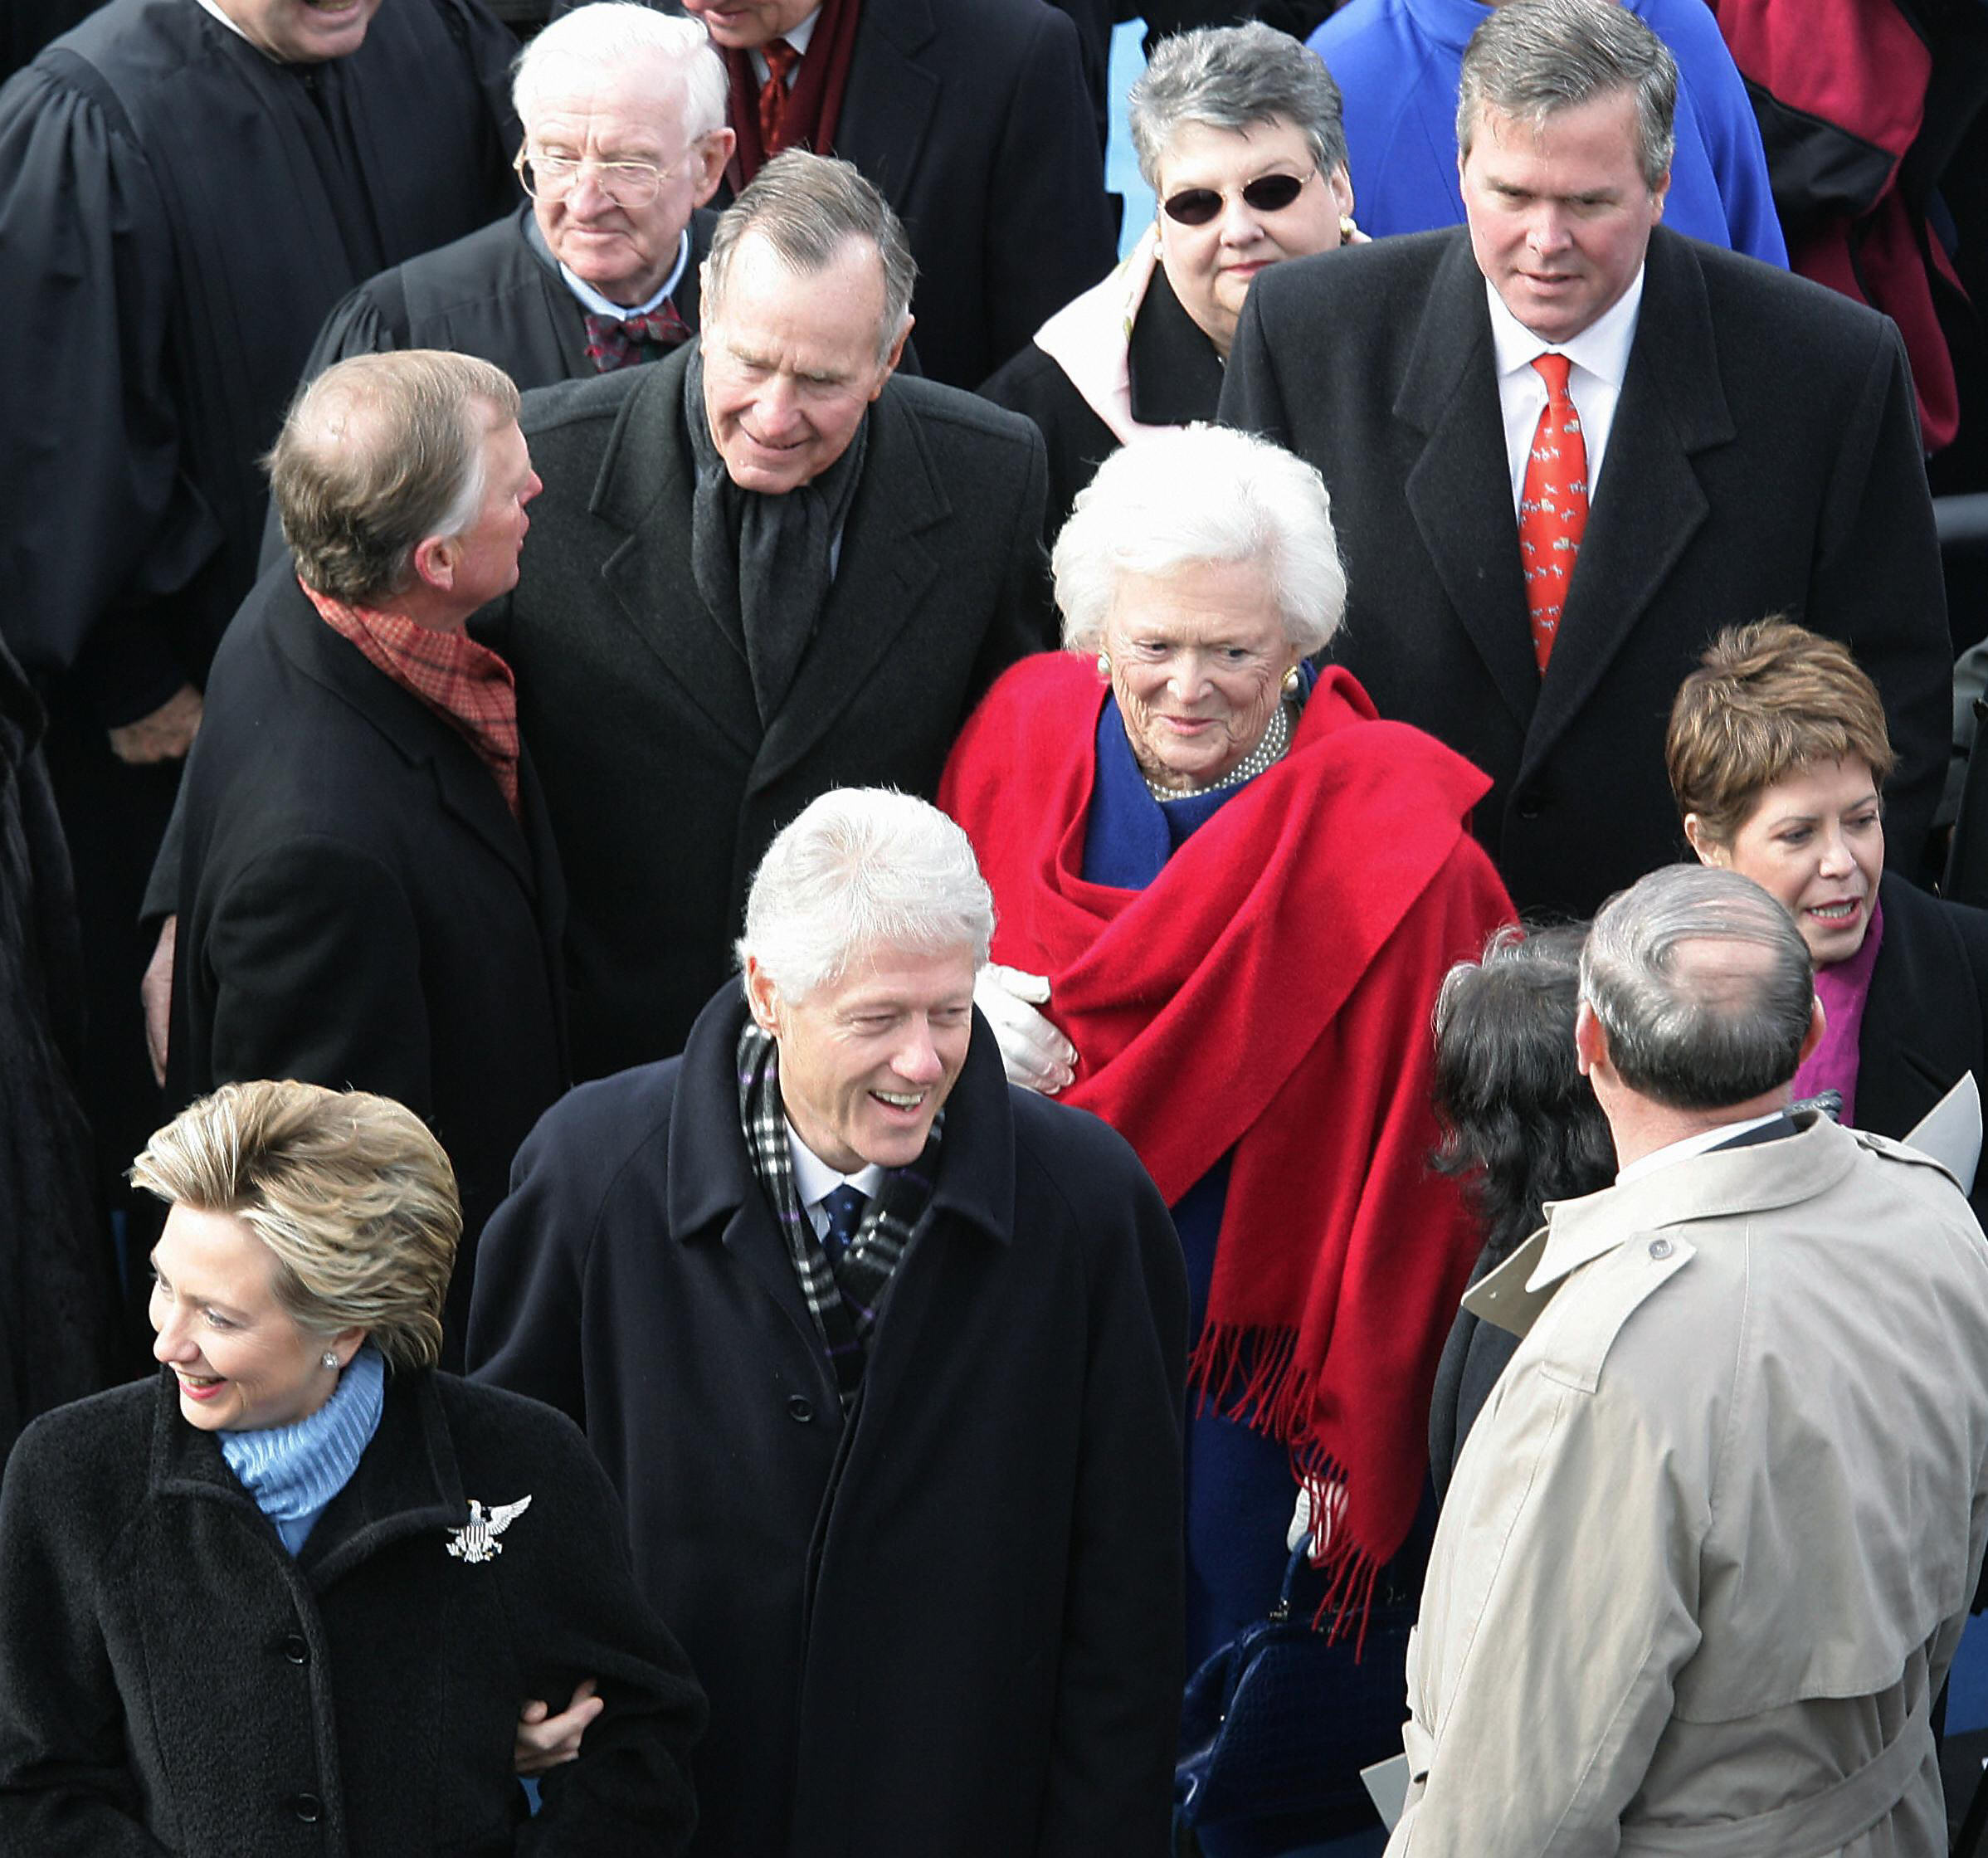 2005 inaugural ceremonies at the U.S. Capitol in Washington, D.C. (DON EMMERT&mdash;AFP/Getty Images)